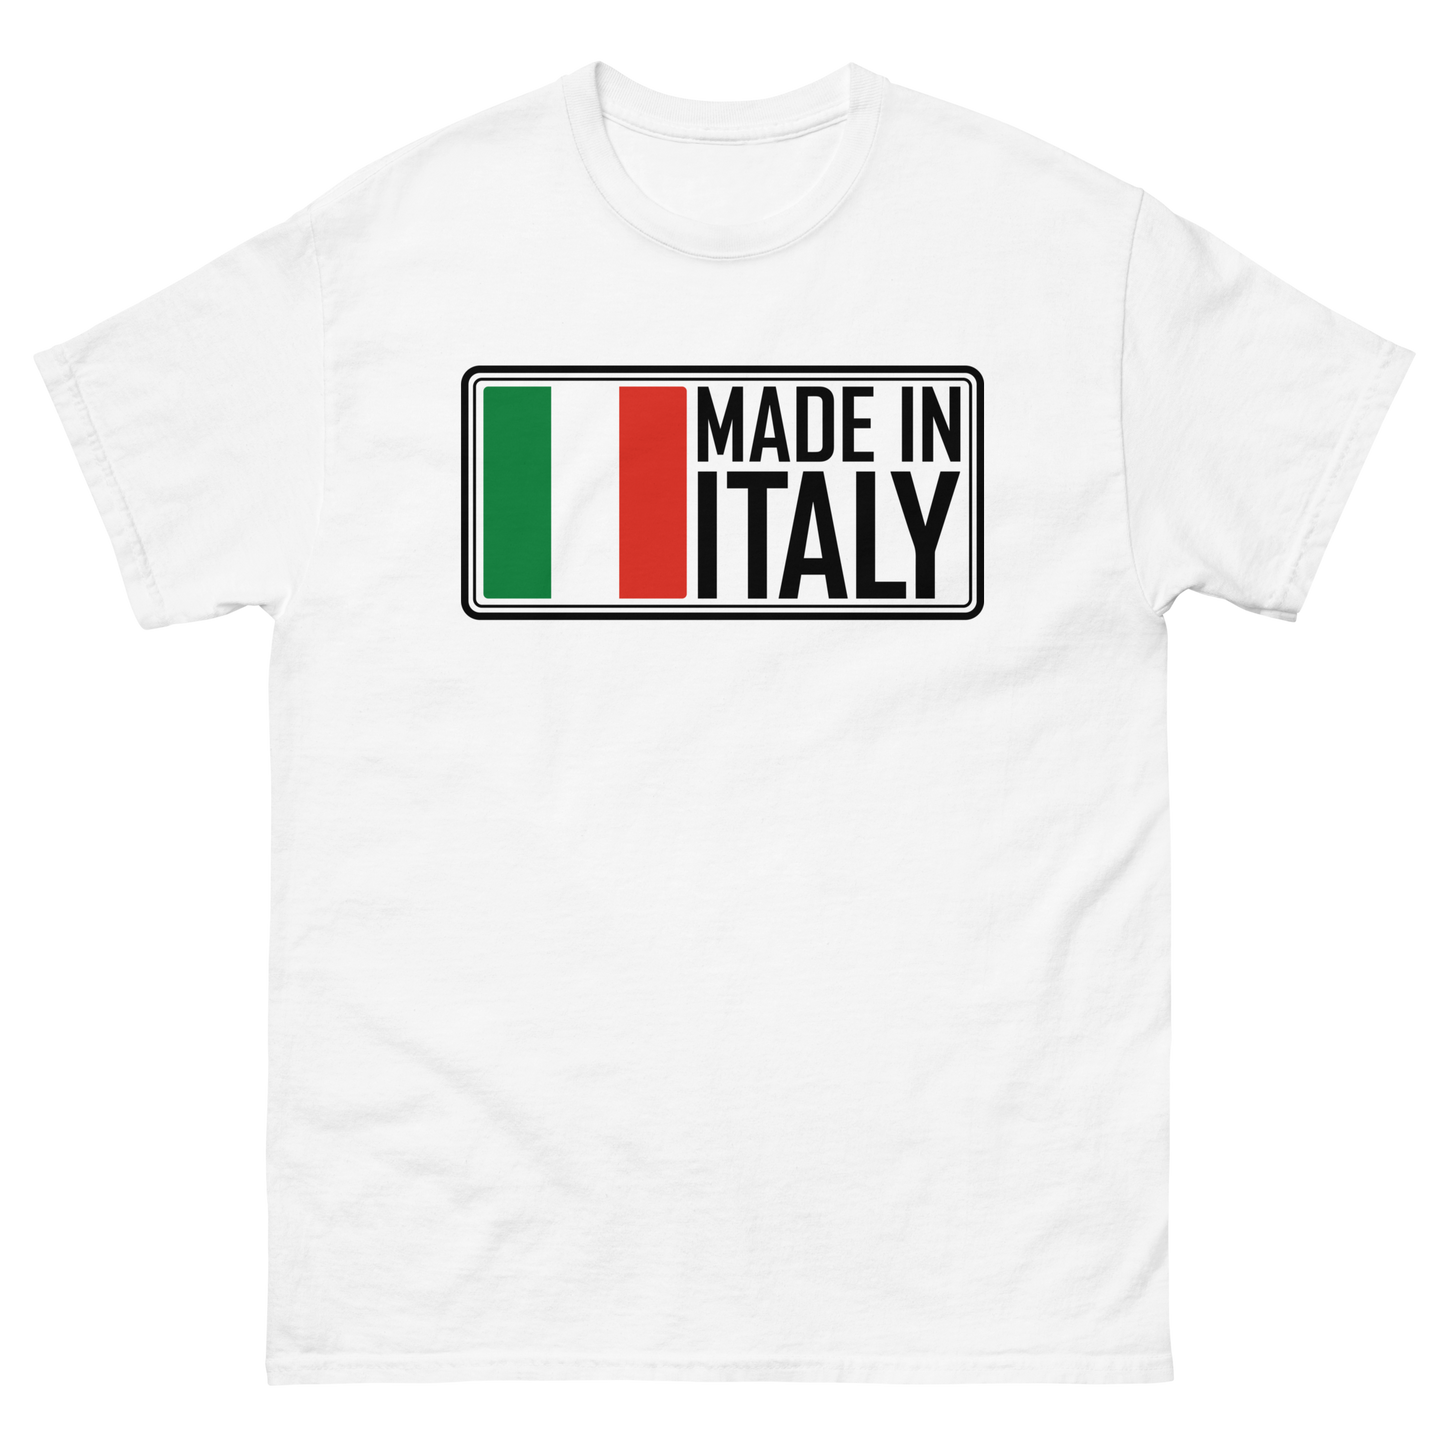 Authentic 'Made In Italy' T-Shirt: Wear the Heritage with Pride- Vintage Tee for Italians